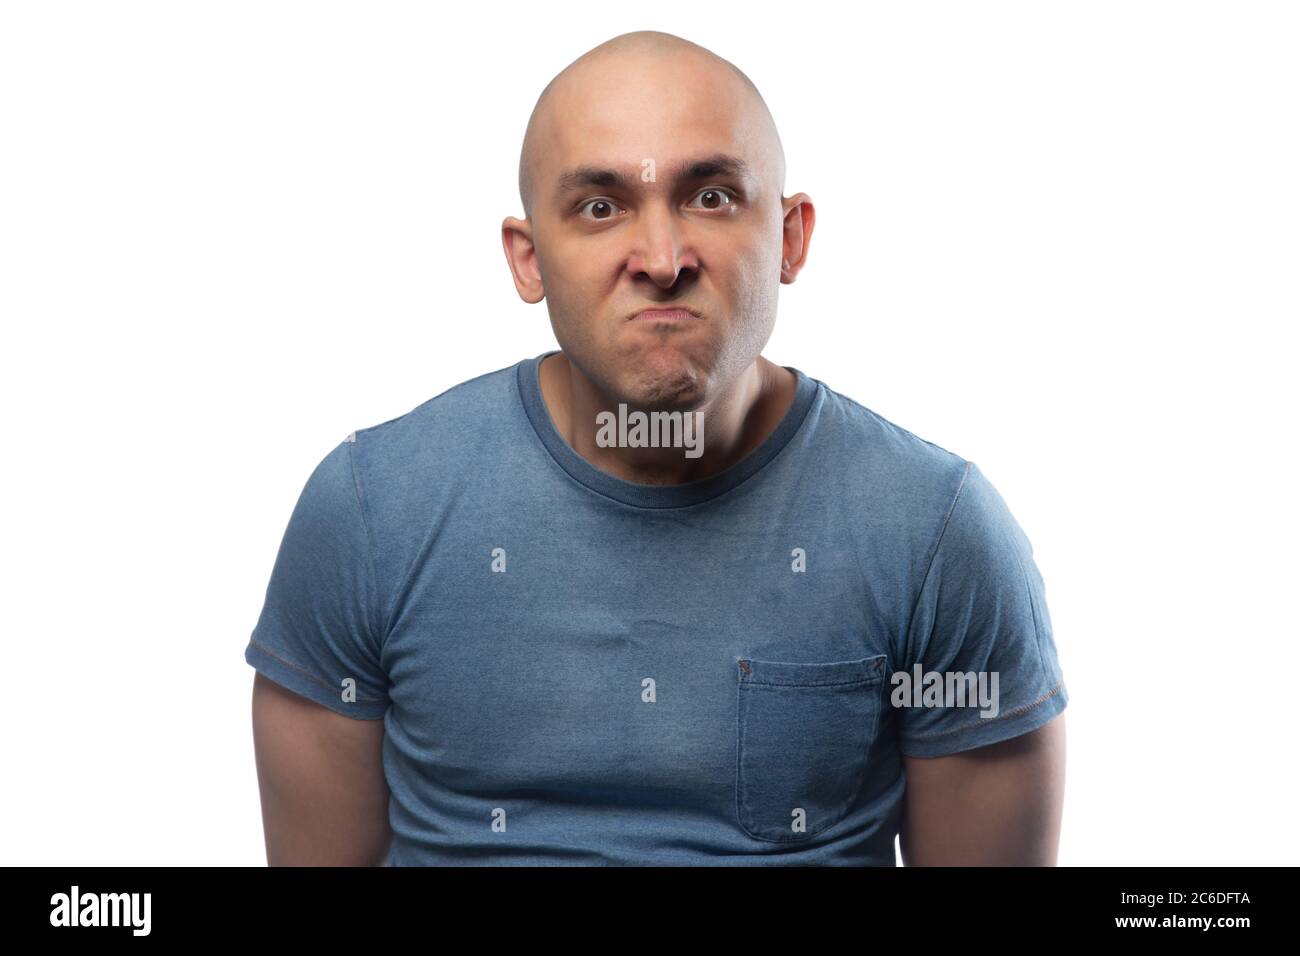 Photo of young bald angry man in blue tee shirt Stock Photo